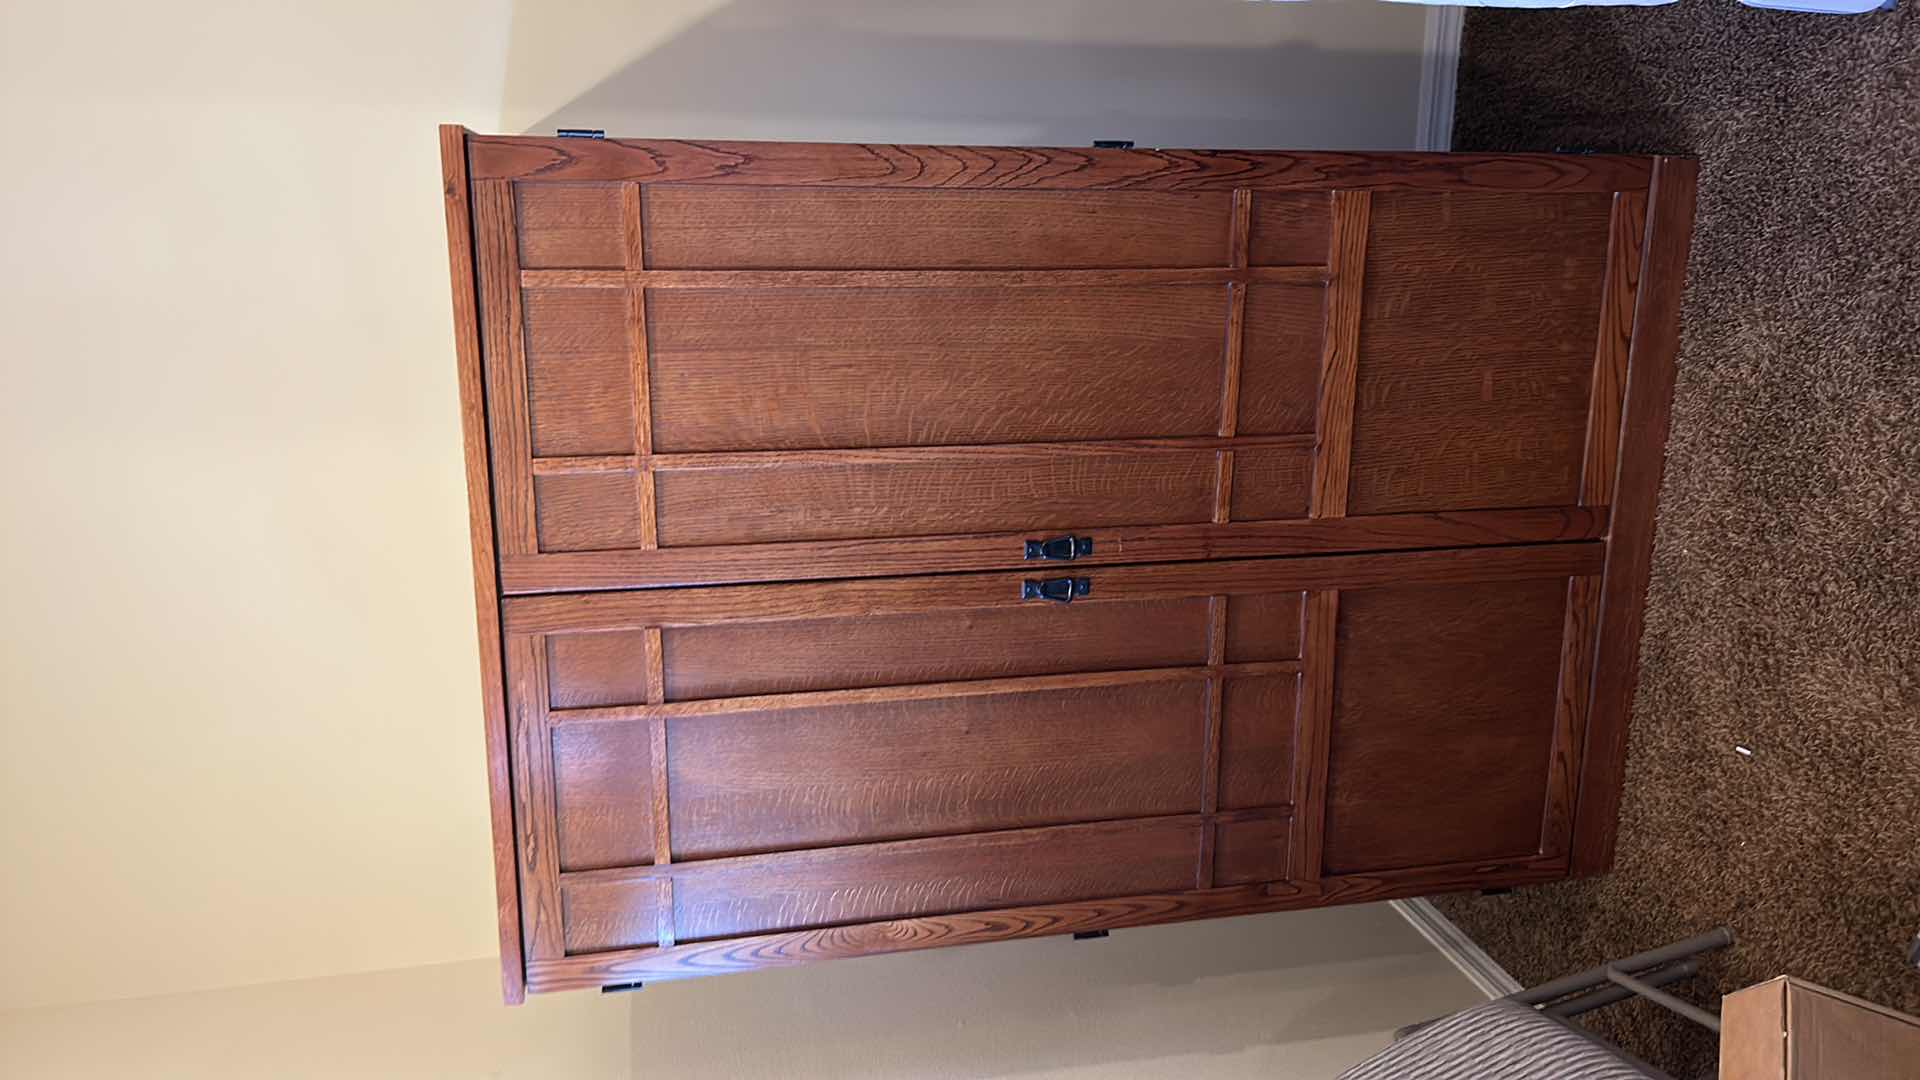 Photo 14 of WOOD EXECUTIVE OFFICE CABINET WITH CONTENTS 44“ x 23 1/2“ x 66 “